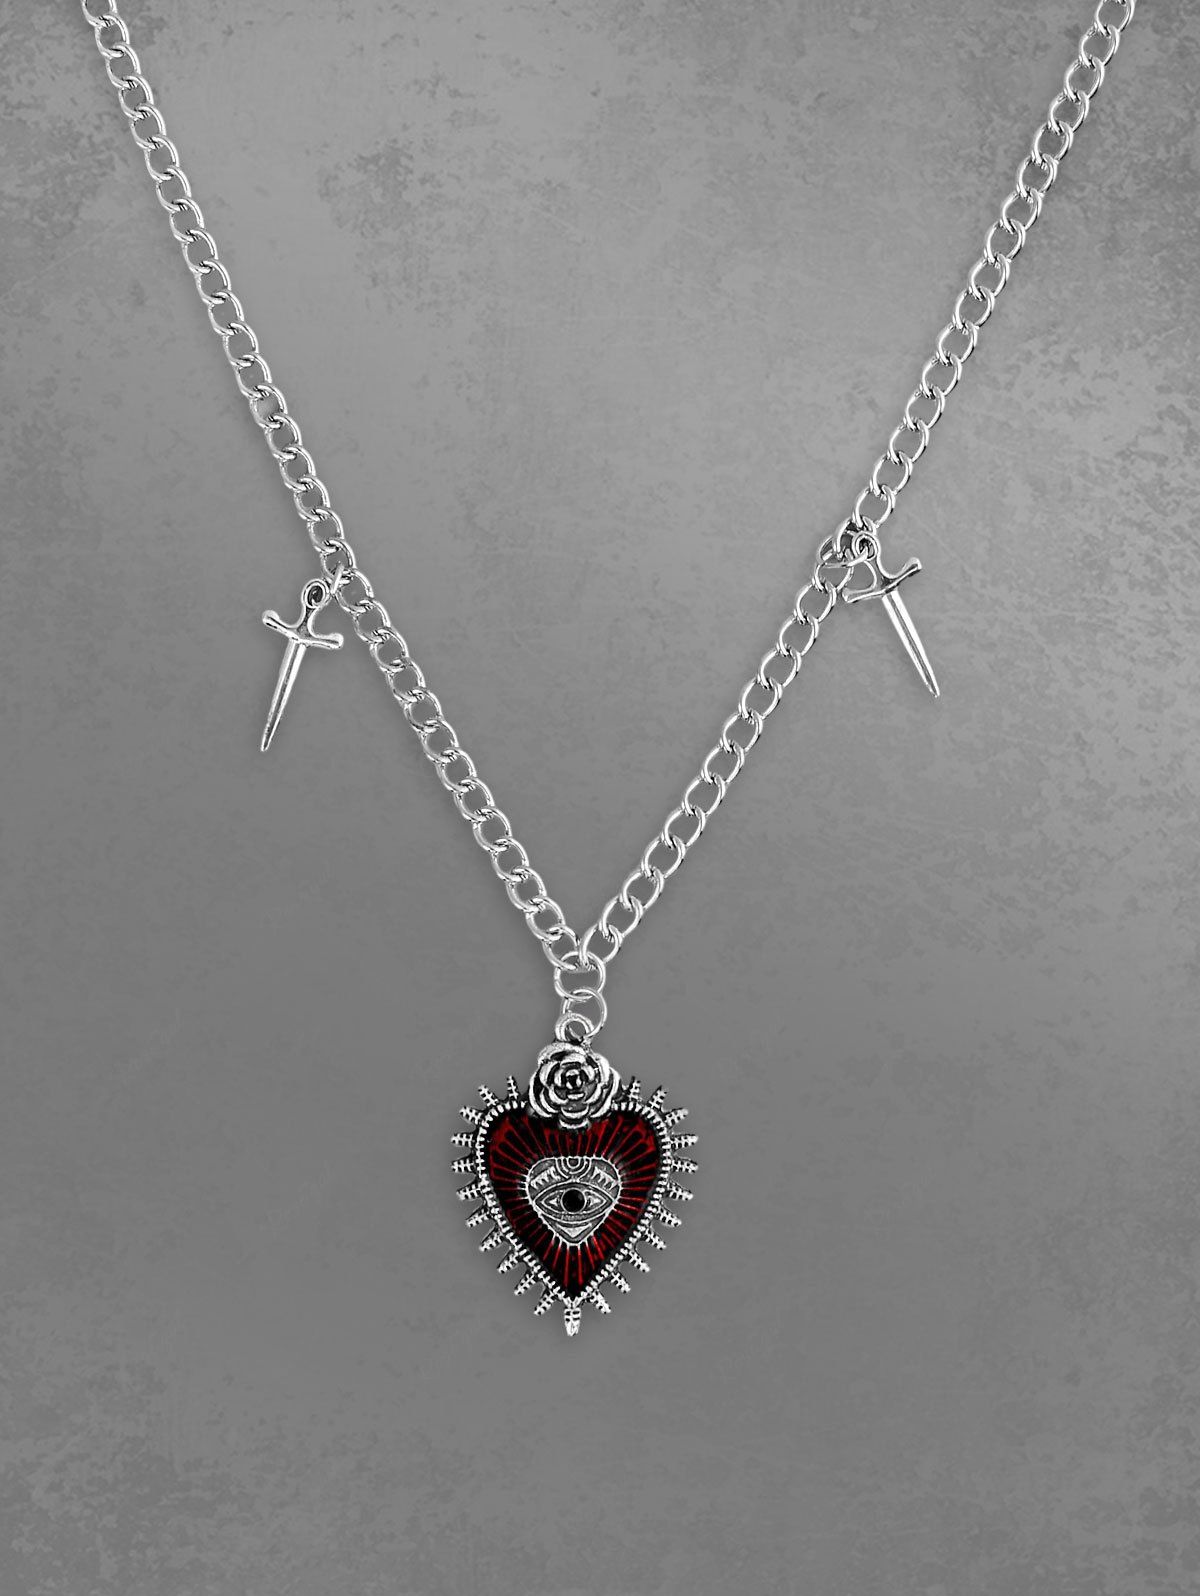 Discount Vintage Gothic Heart Charm Necklace  